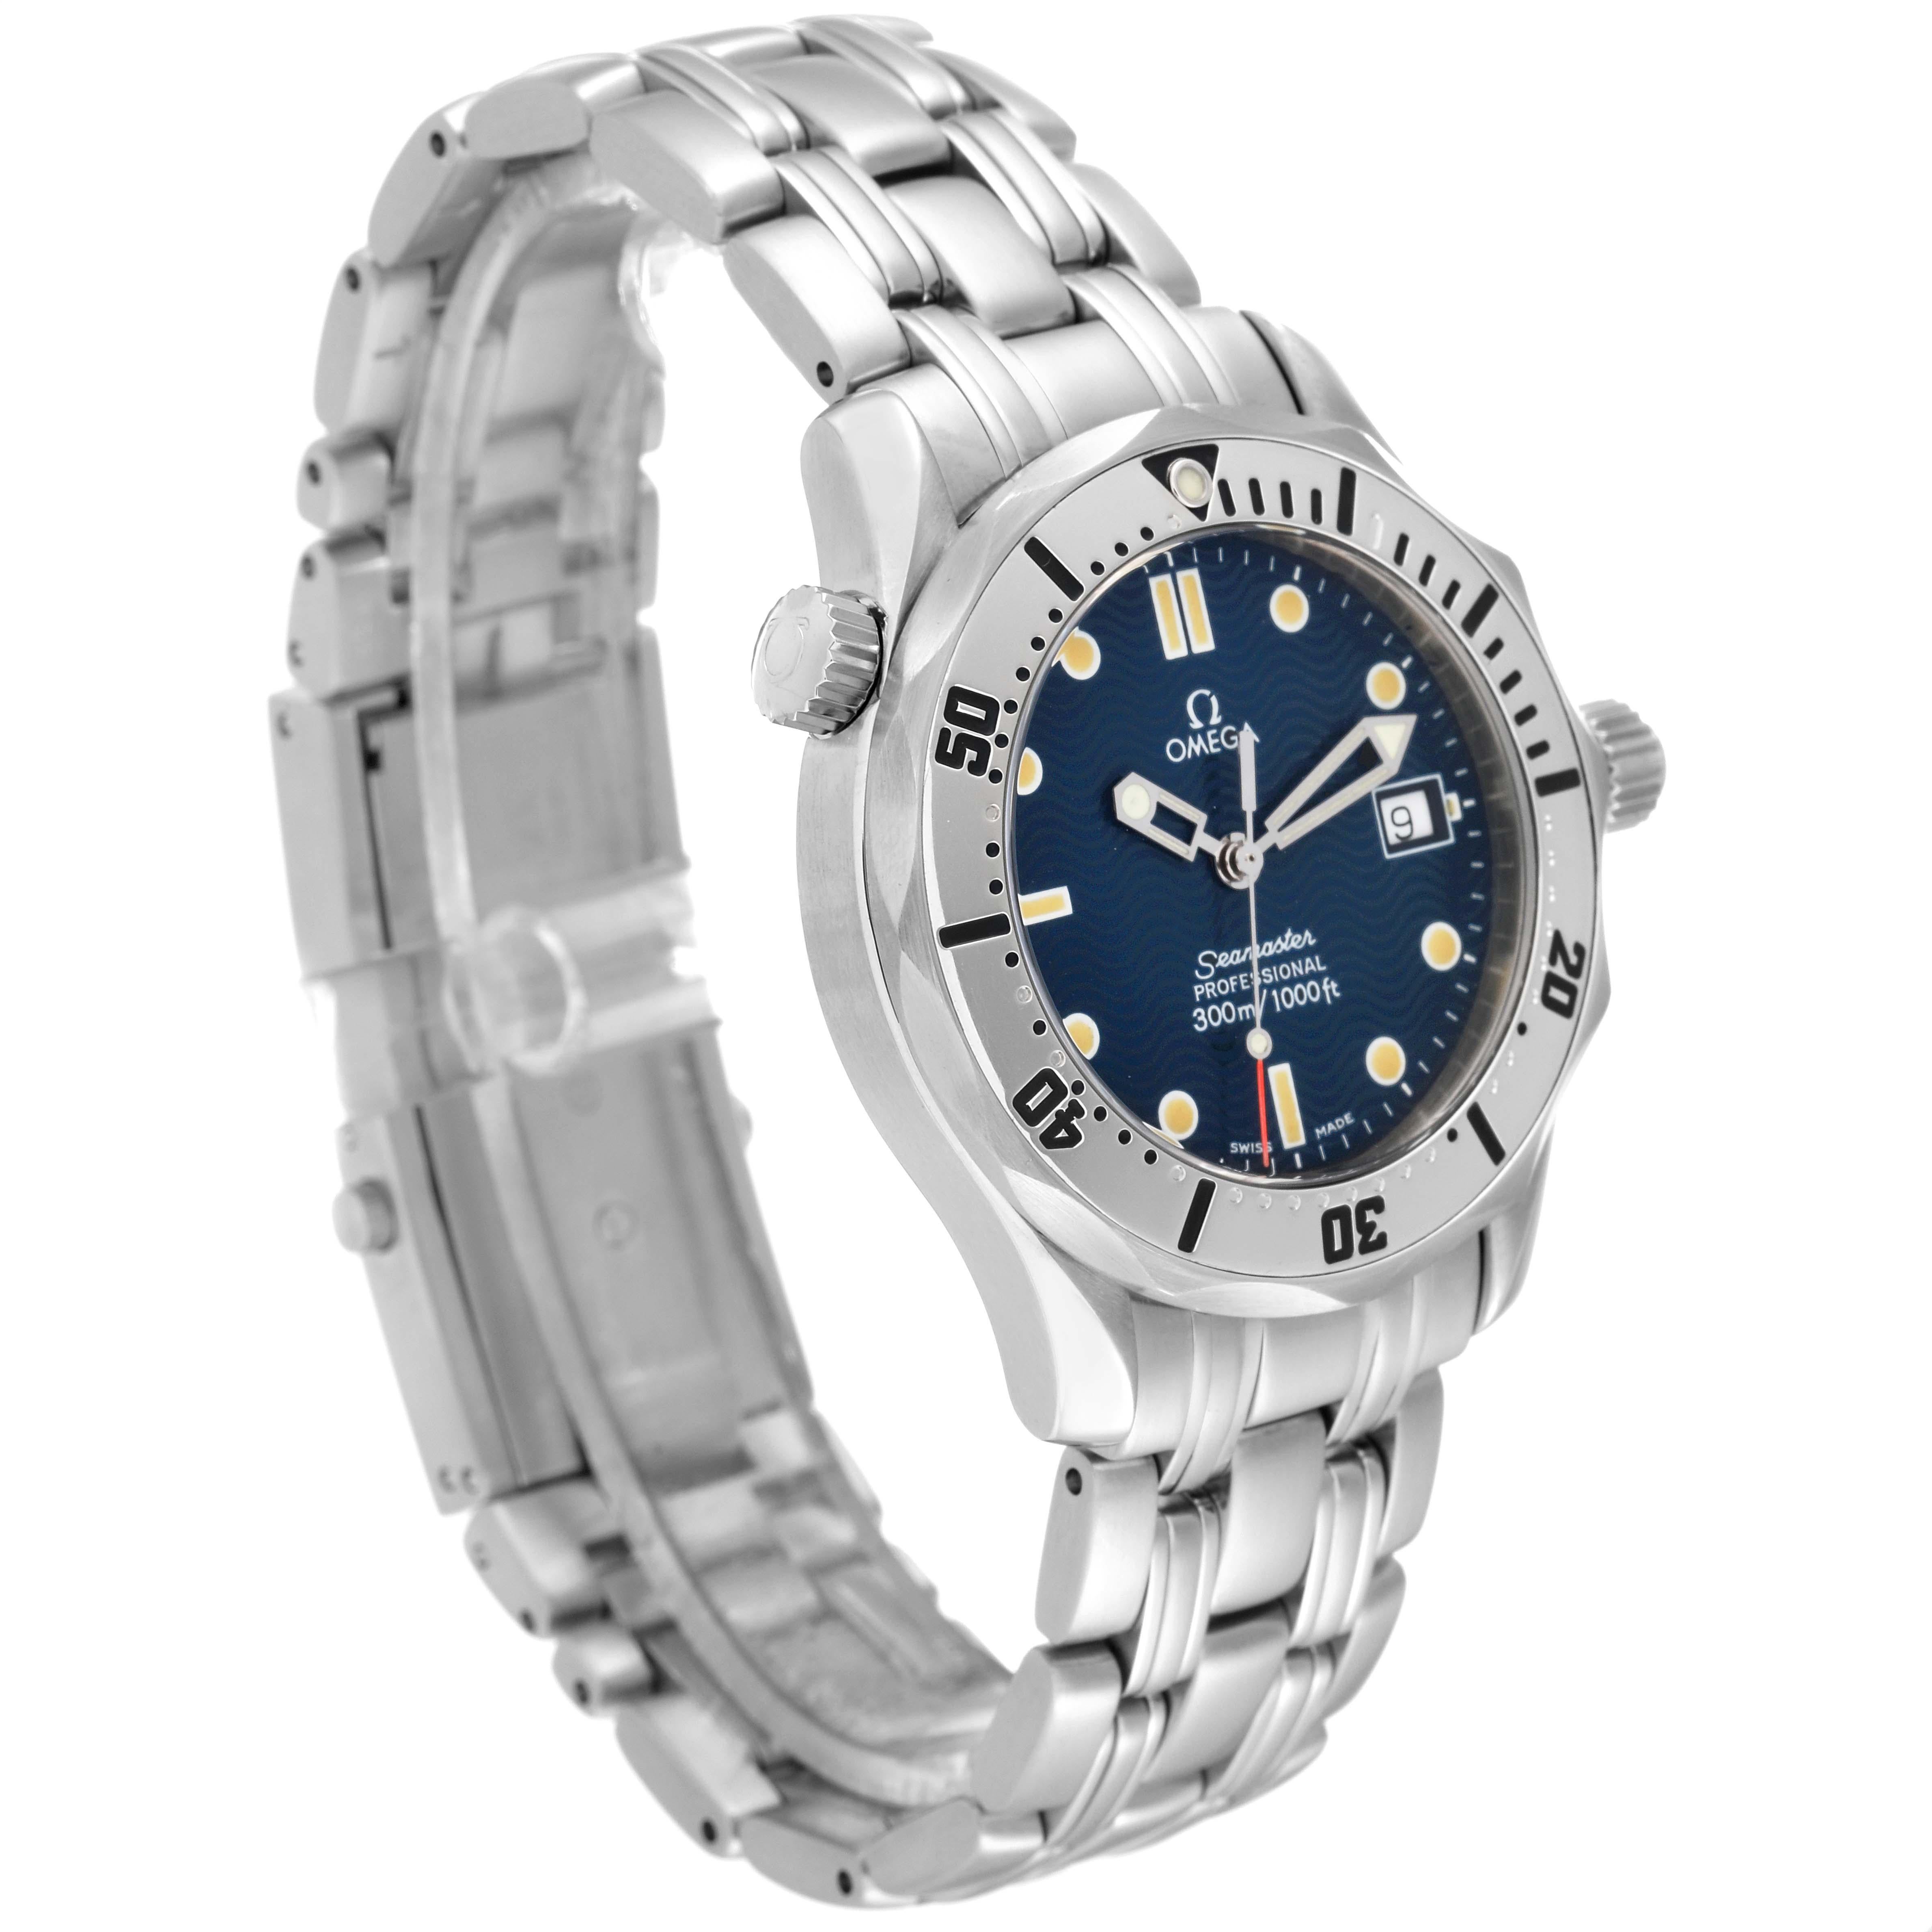 Omega Seamaster 300m Midsize 36mm Steel Mens Watch 2562.80.00 In Excellent Condition For Sale In Atlanta, GA